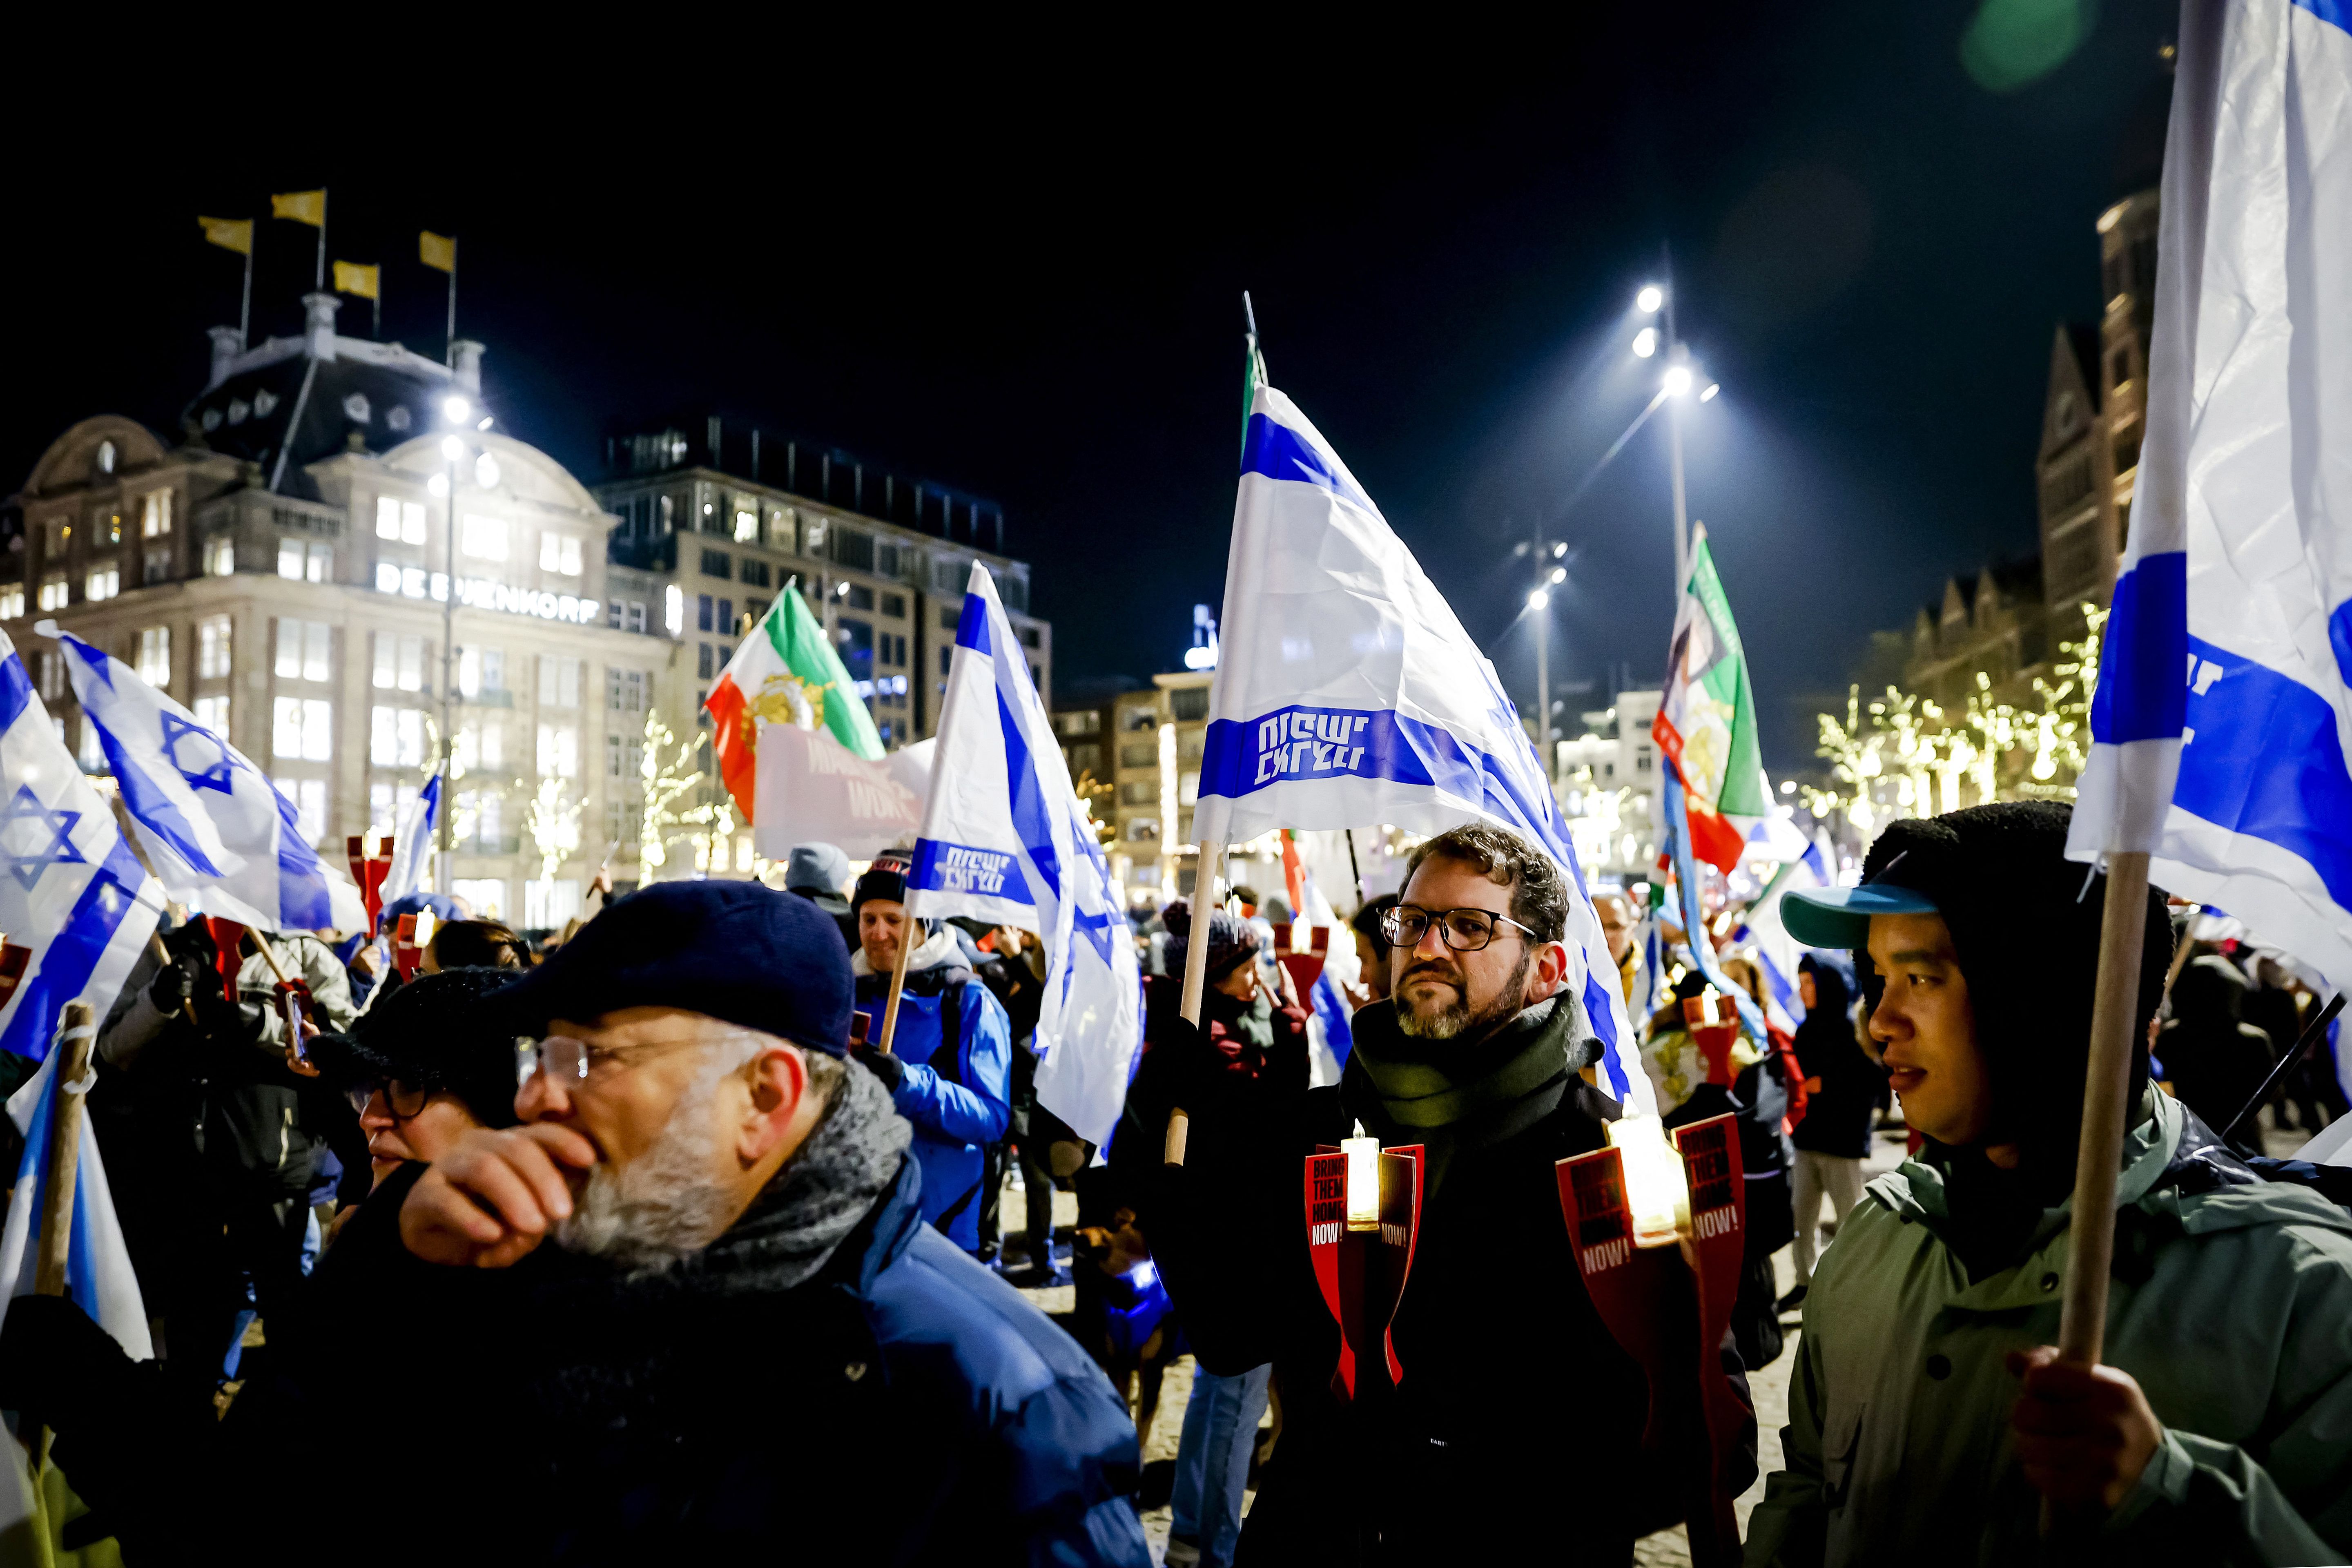 People march at Dam Square during the national Hanukkah celebration in Amsterdam.